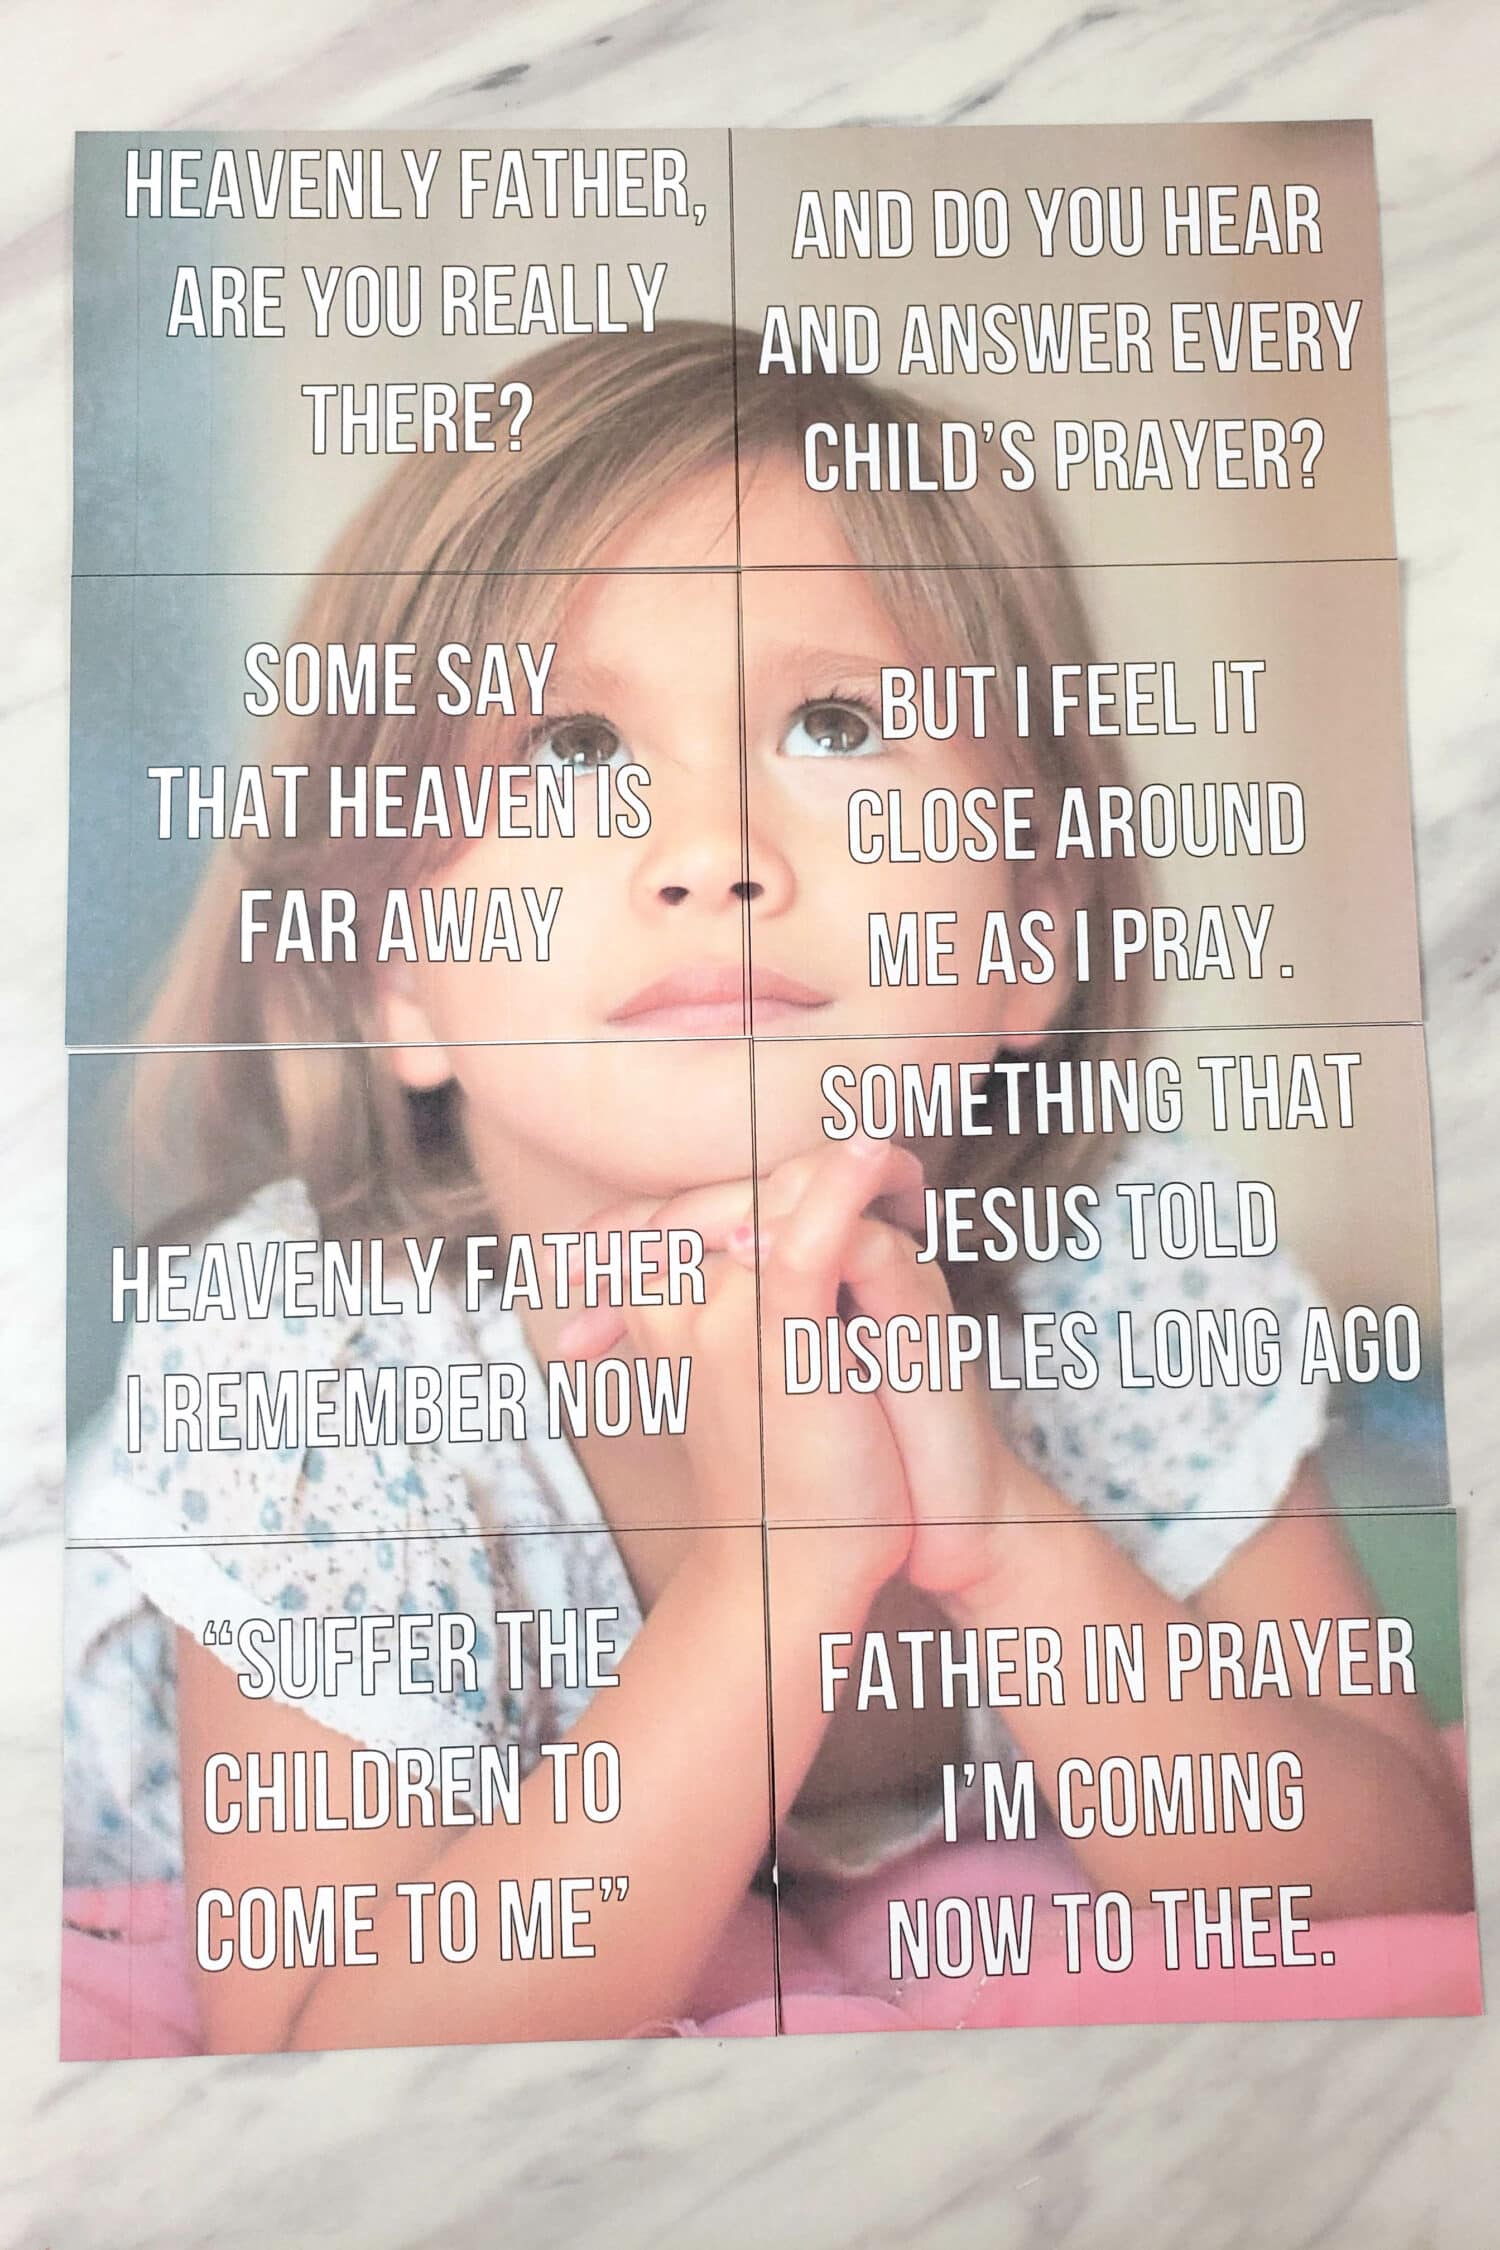 A Child's Prayer picture puzzle printable fun singing time idea for LDS Primary music leaders. You'll cut out the picture with lyrics and can combine them to a double sided poster that flips over to reveal the 2nd verse! 